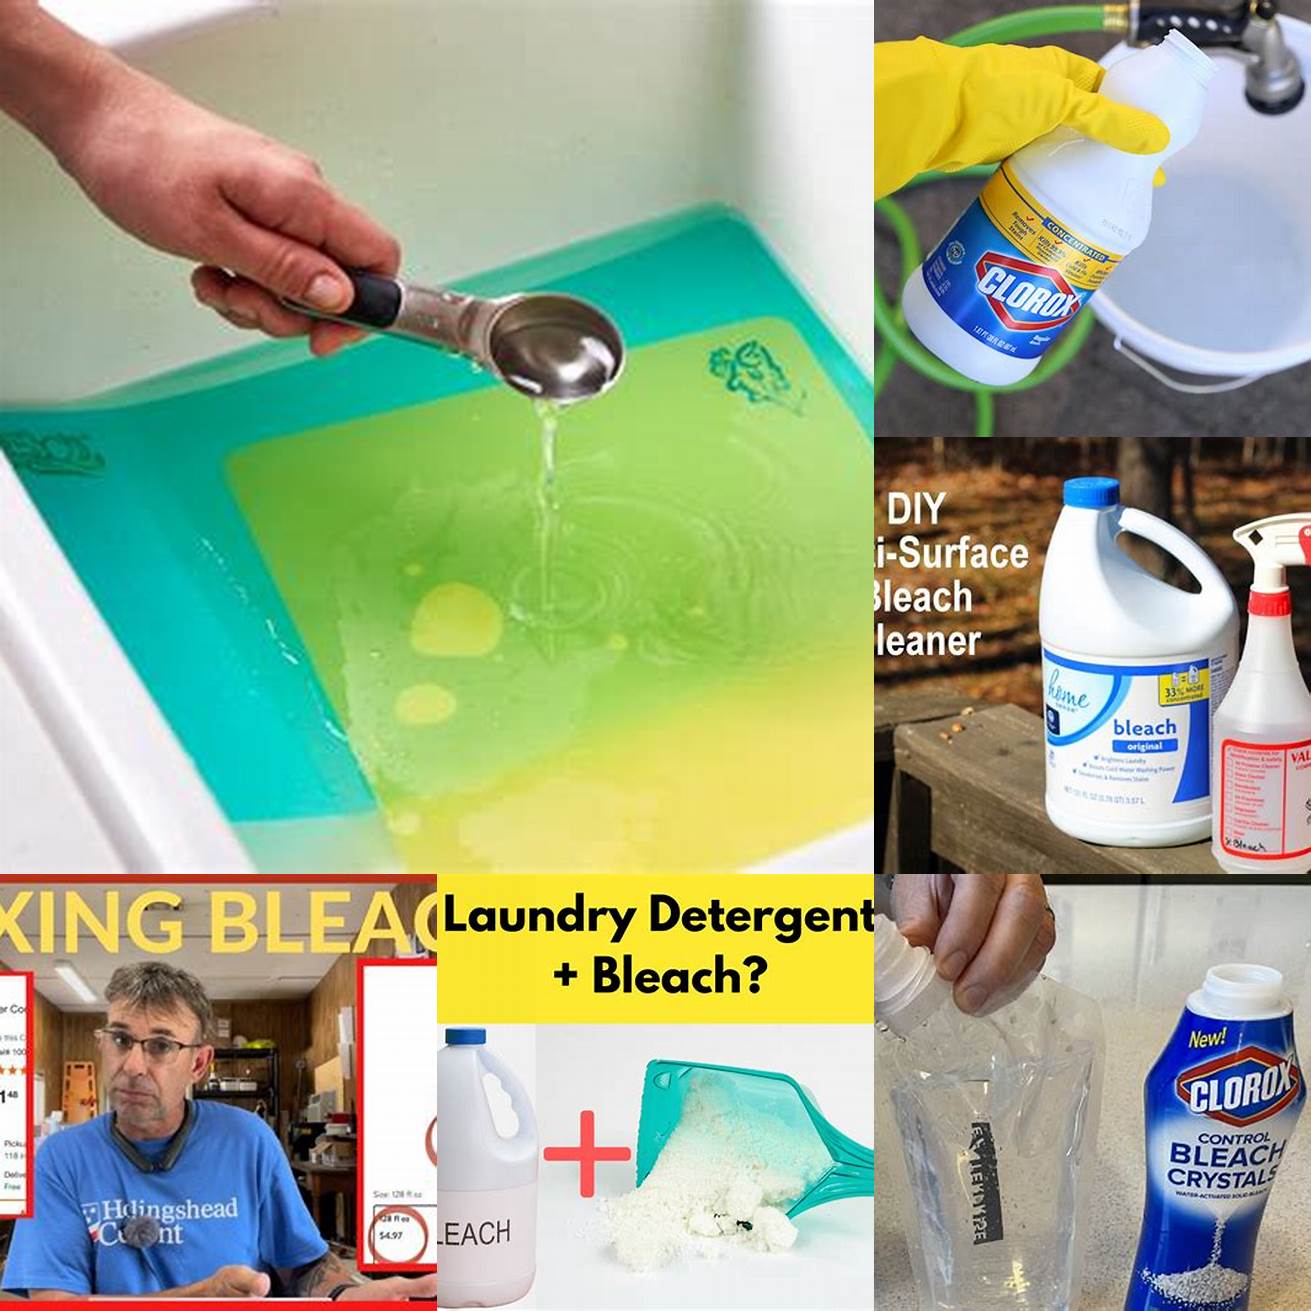 Mix bleach and water